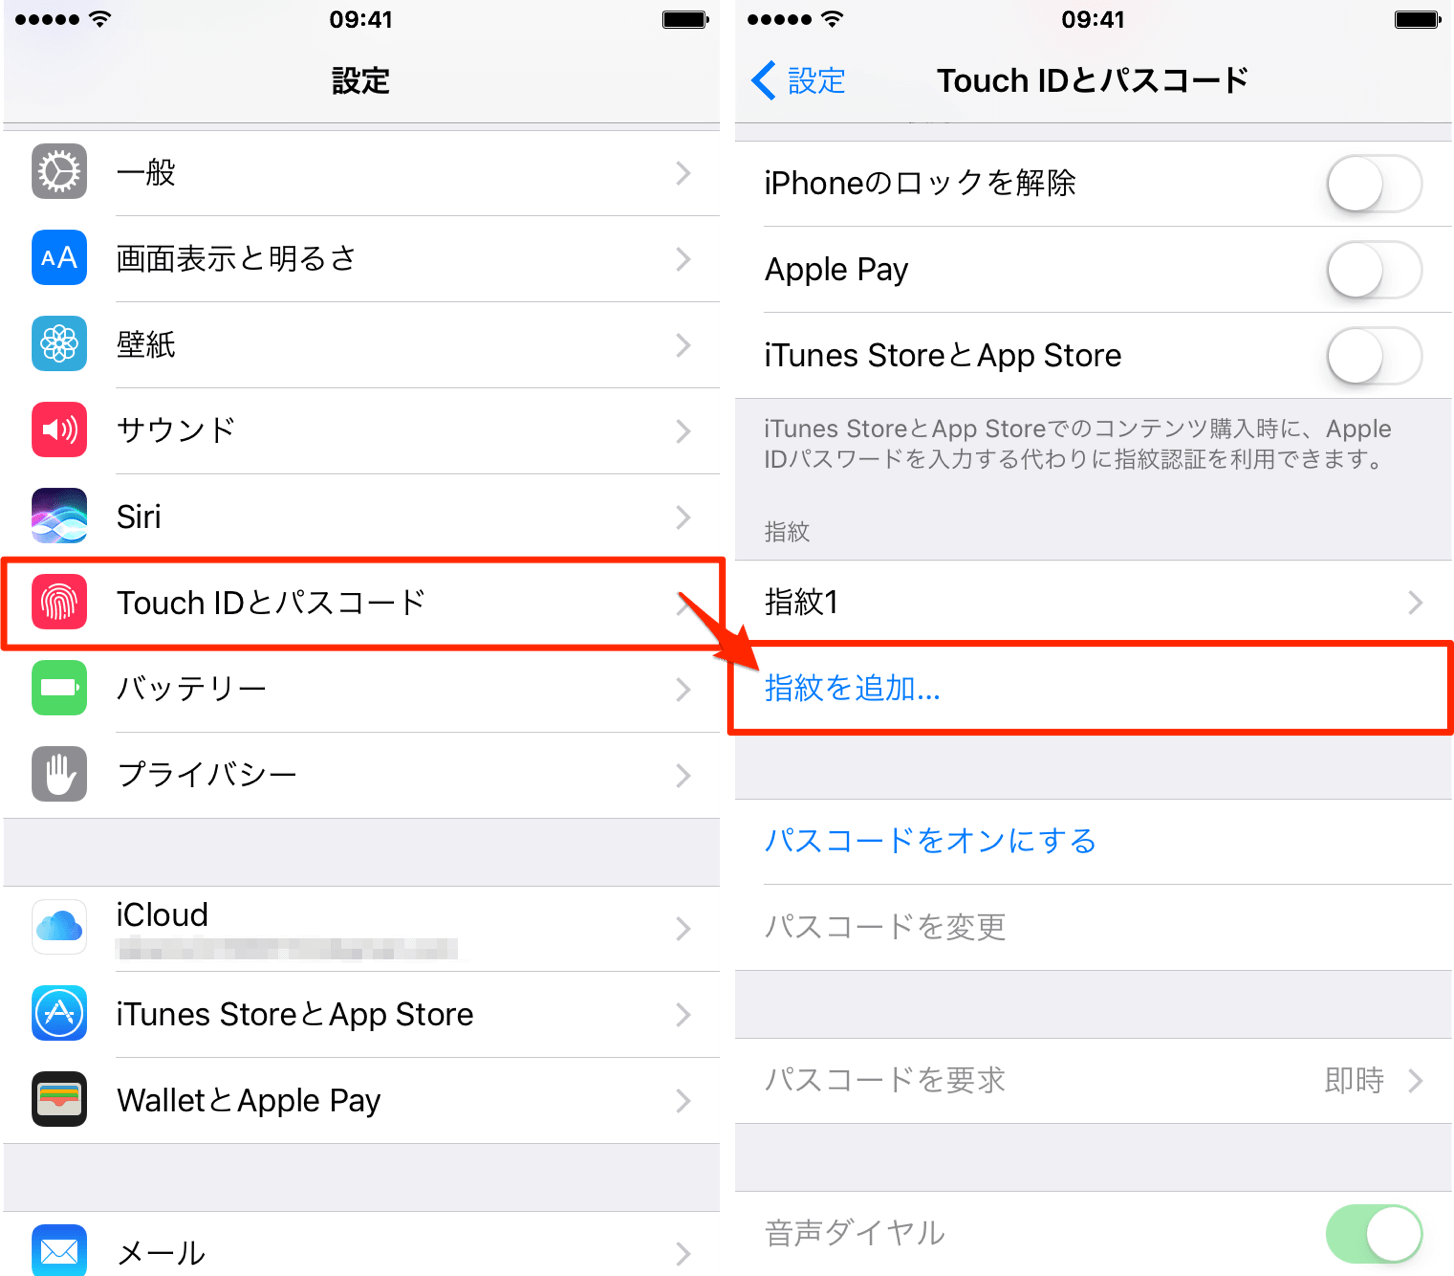 IPhone-ouchid指紋設定